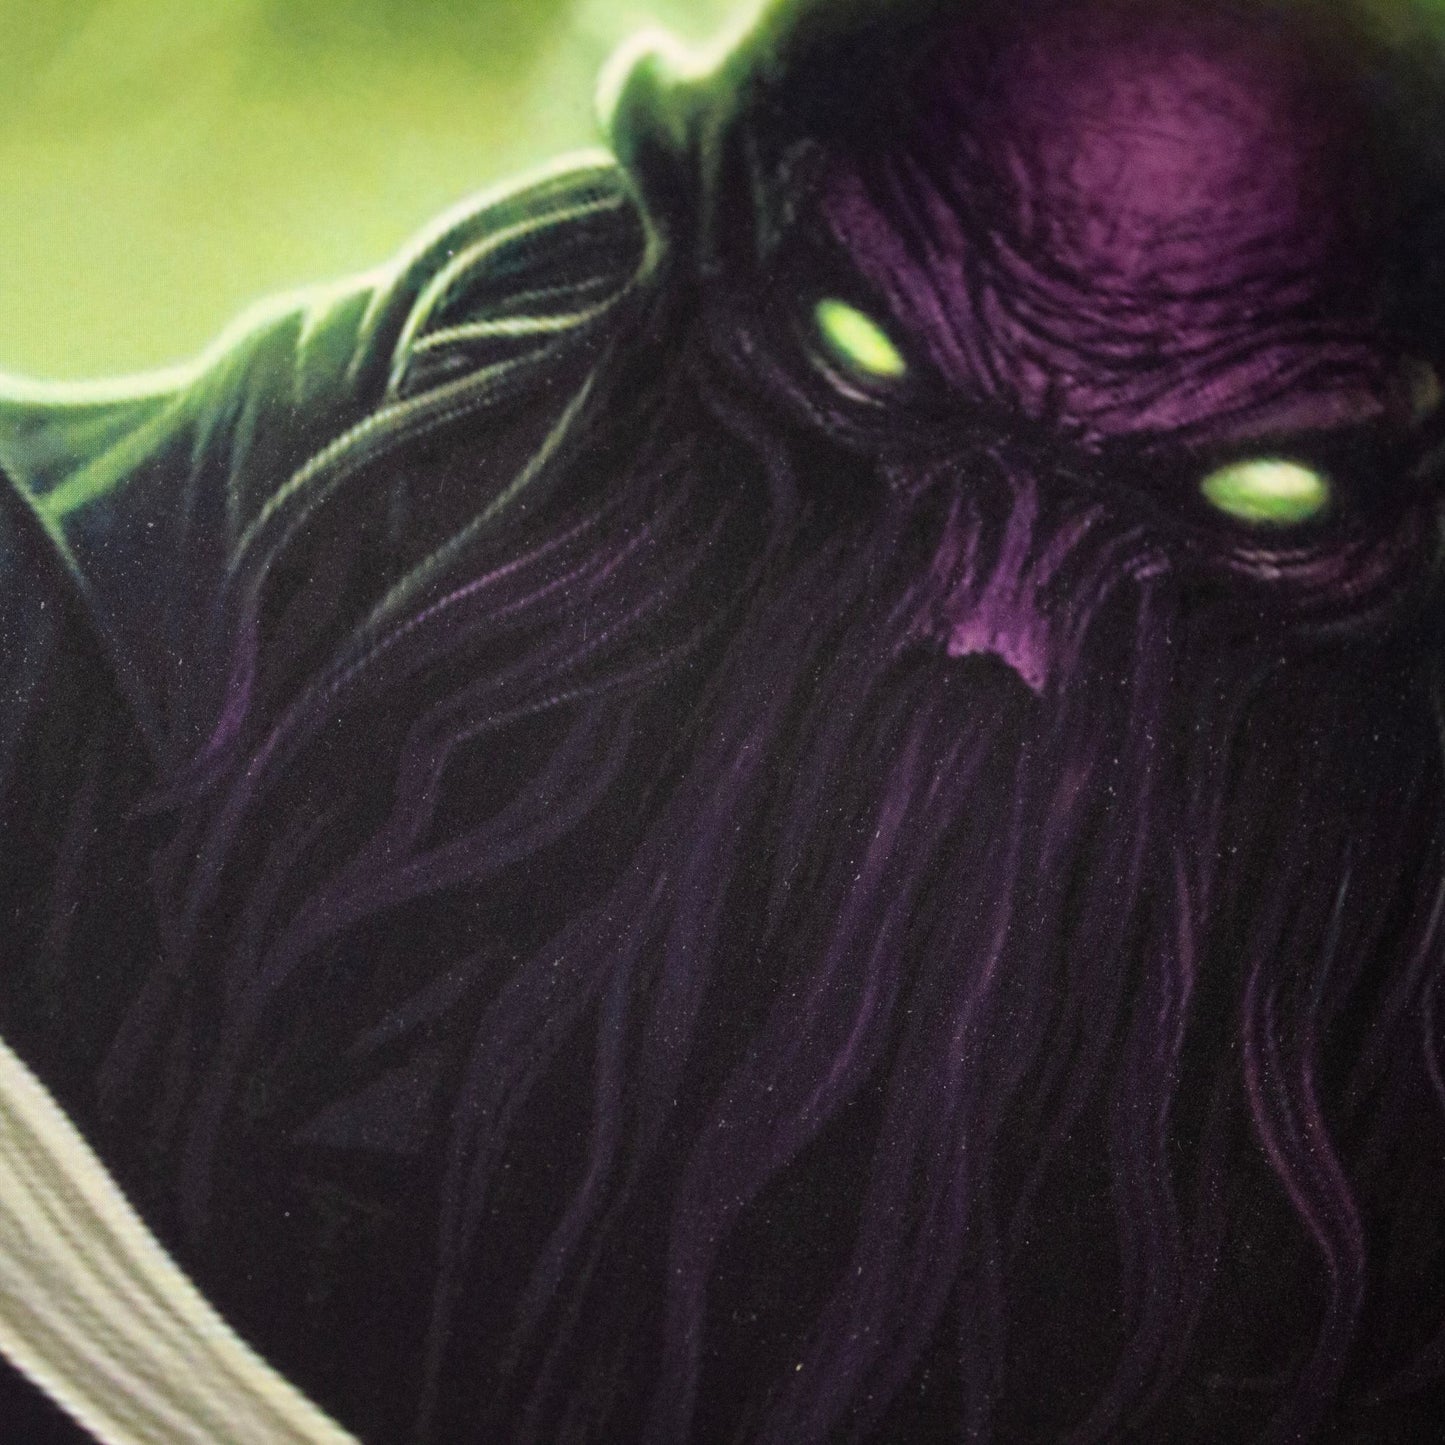 The Cthulhu Mythos TTRPG Character Sheet Book